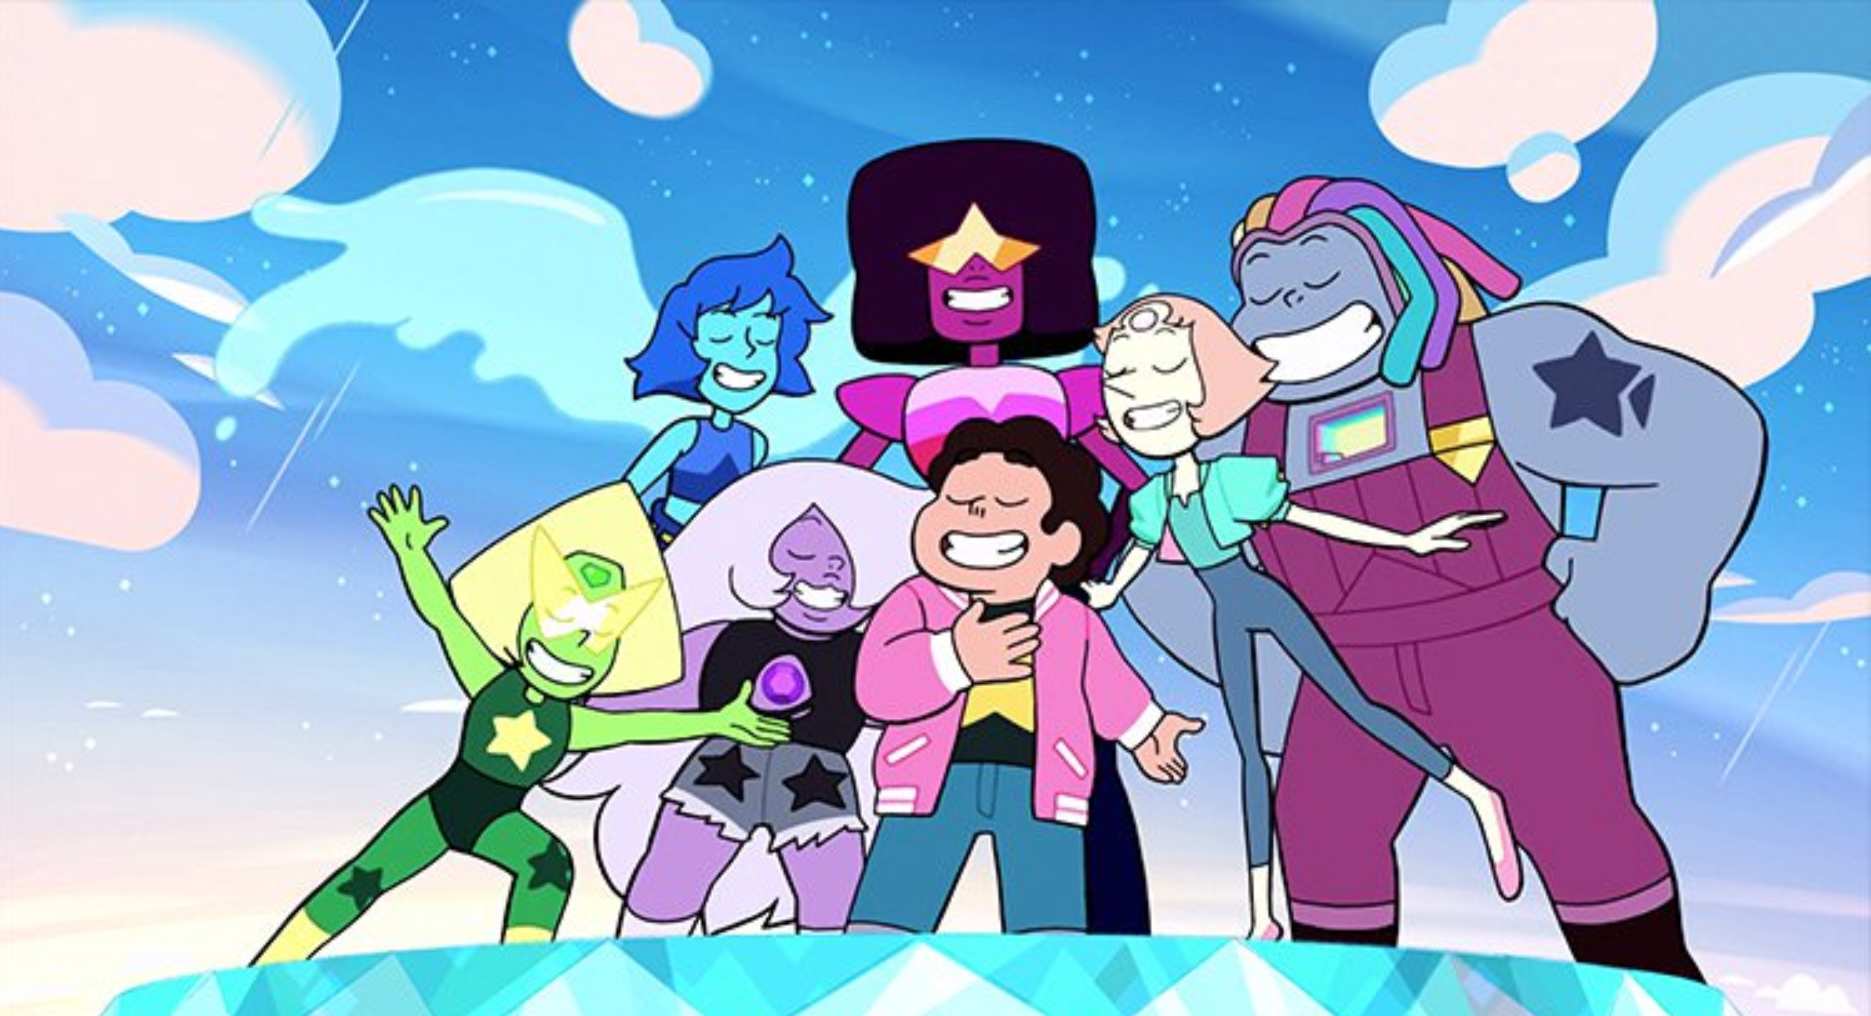 Steven Universe Future's opening sequence hides a lot of small